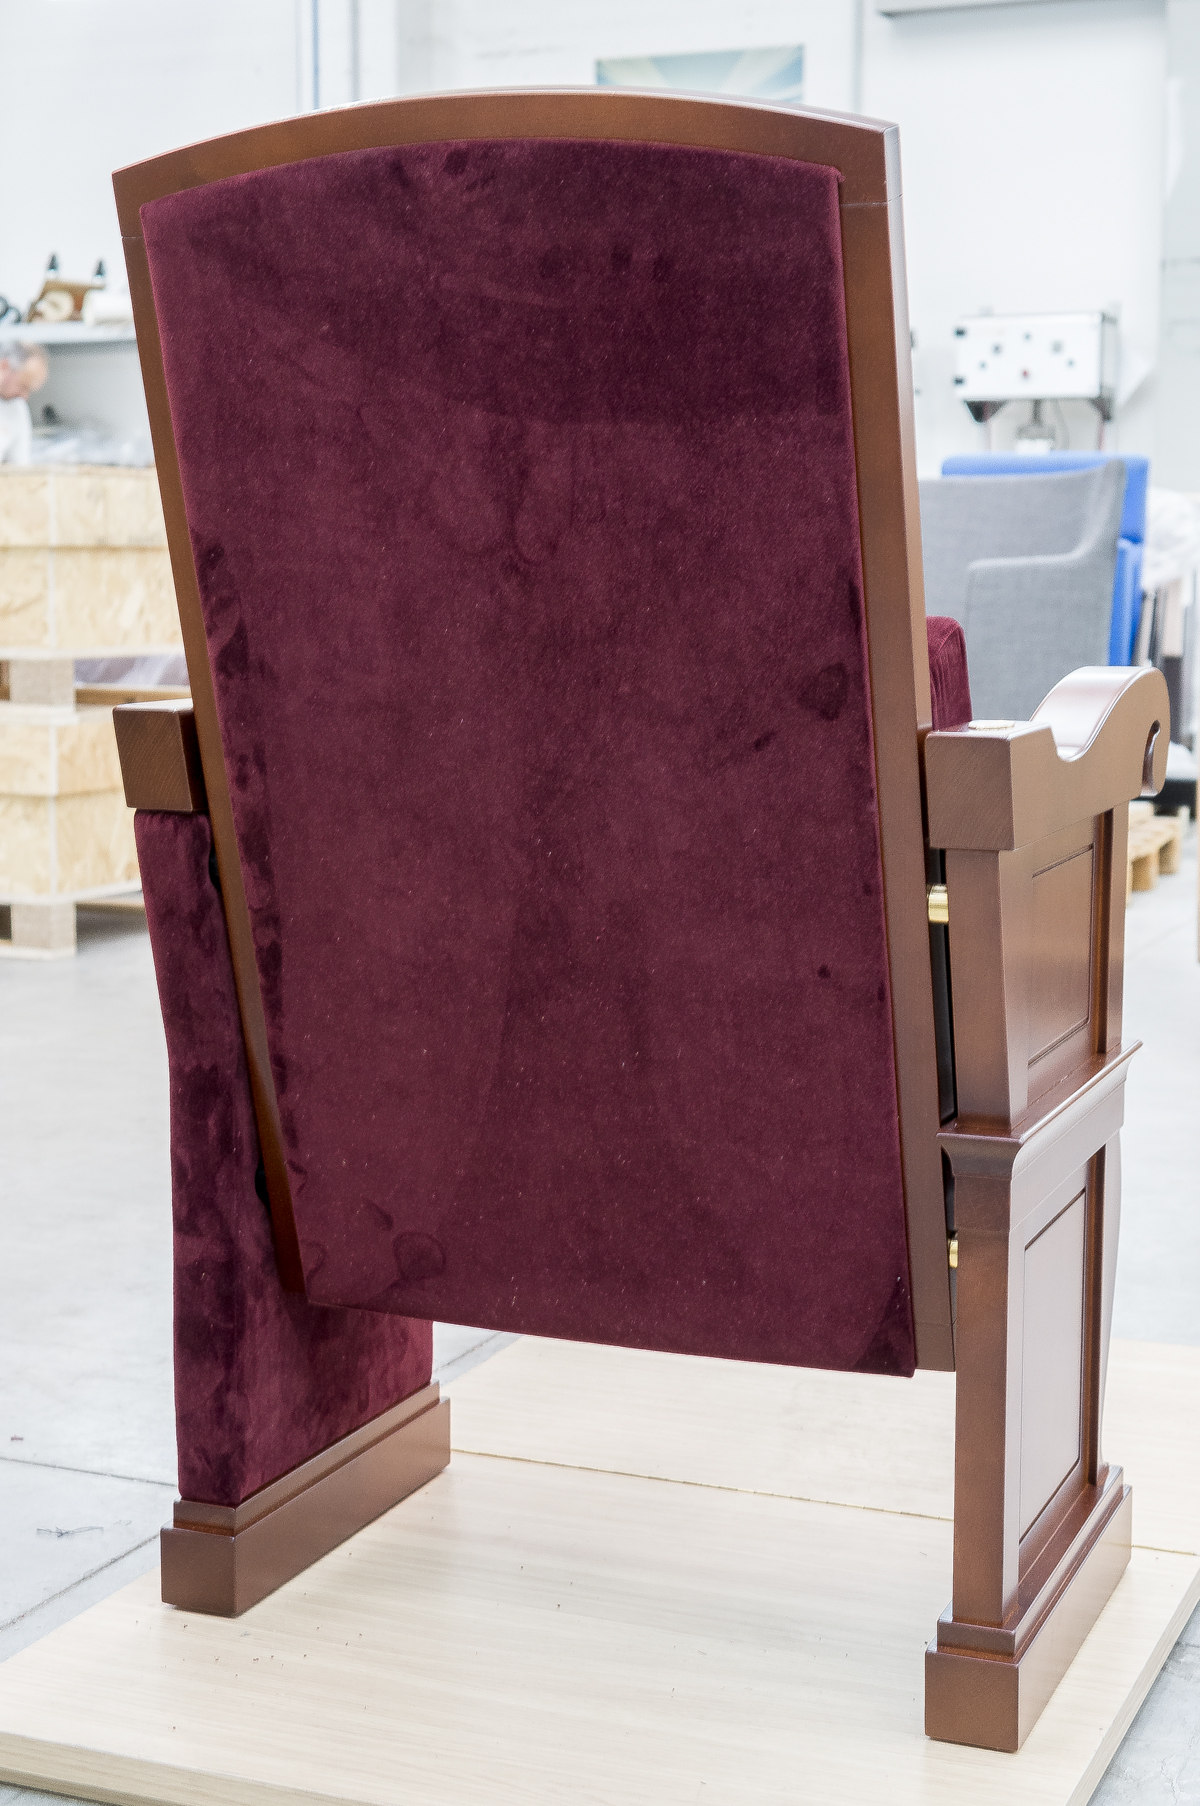 New Theatre Seating Chairs - NOVAT - photo 12